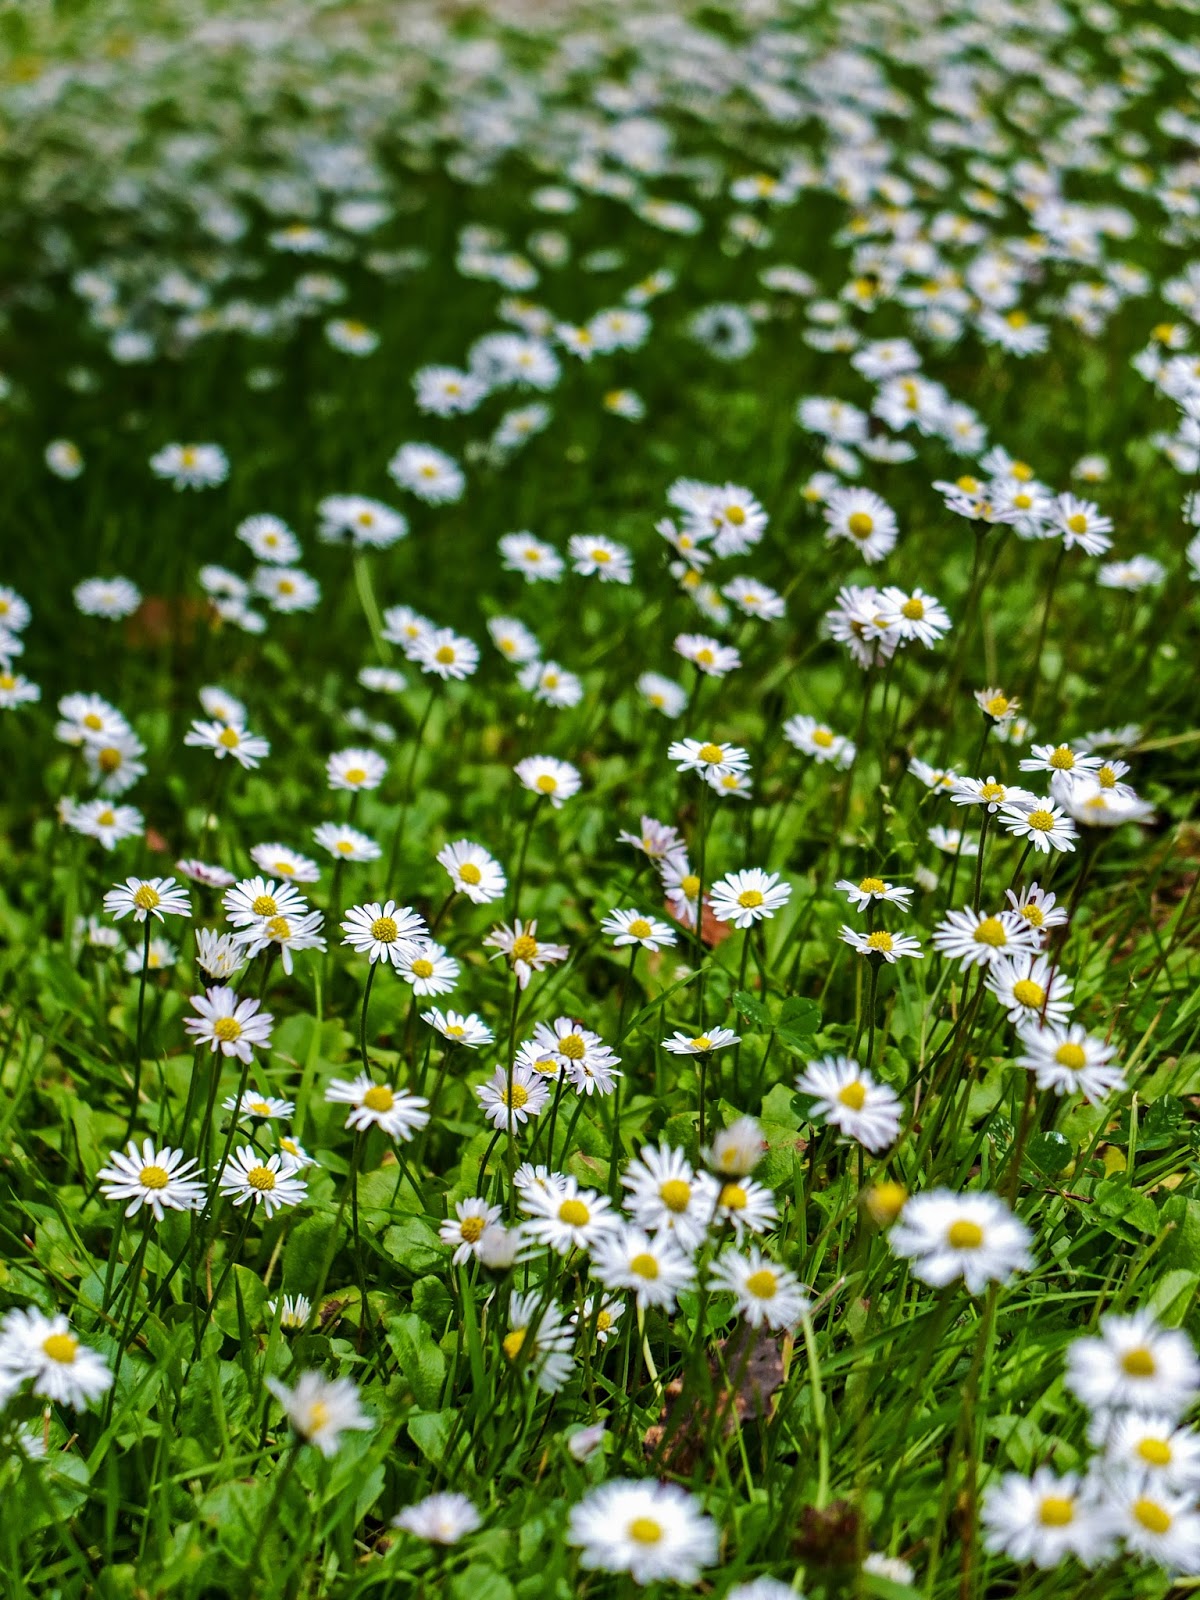 Close up of a field of daisies and grass in Fota Gardens.